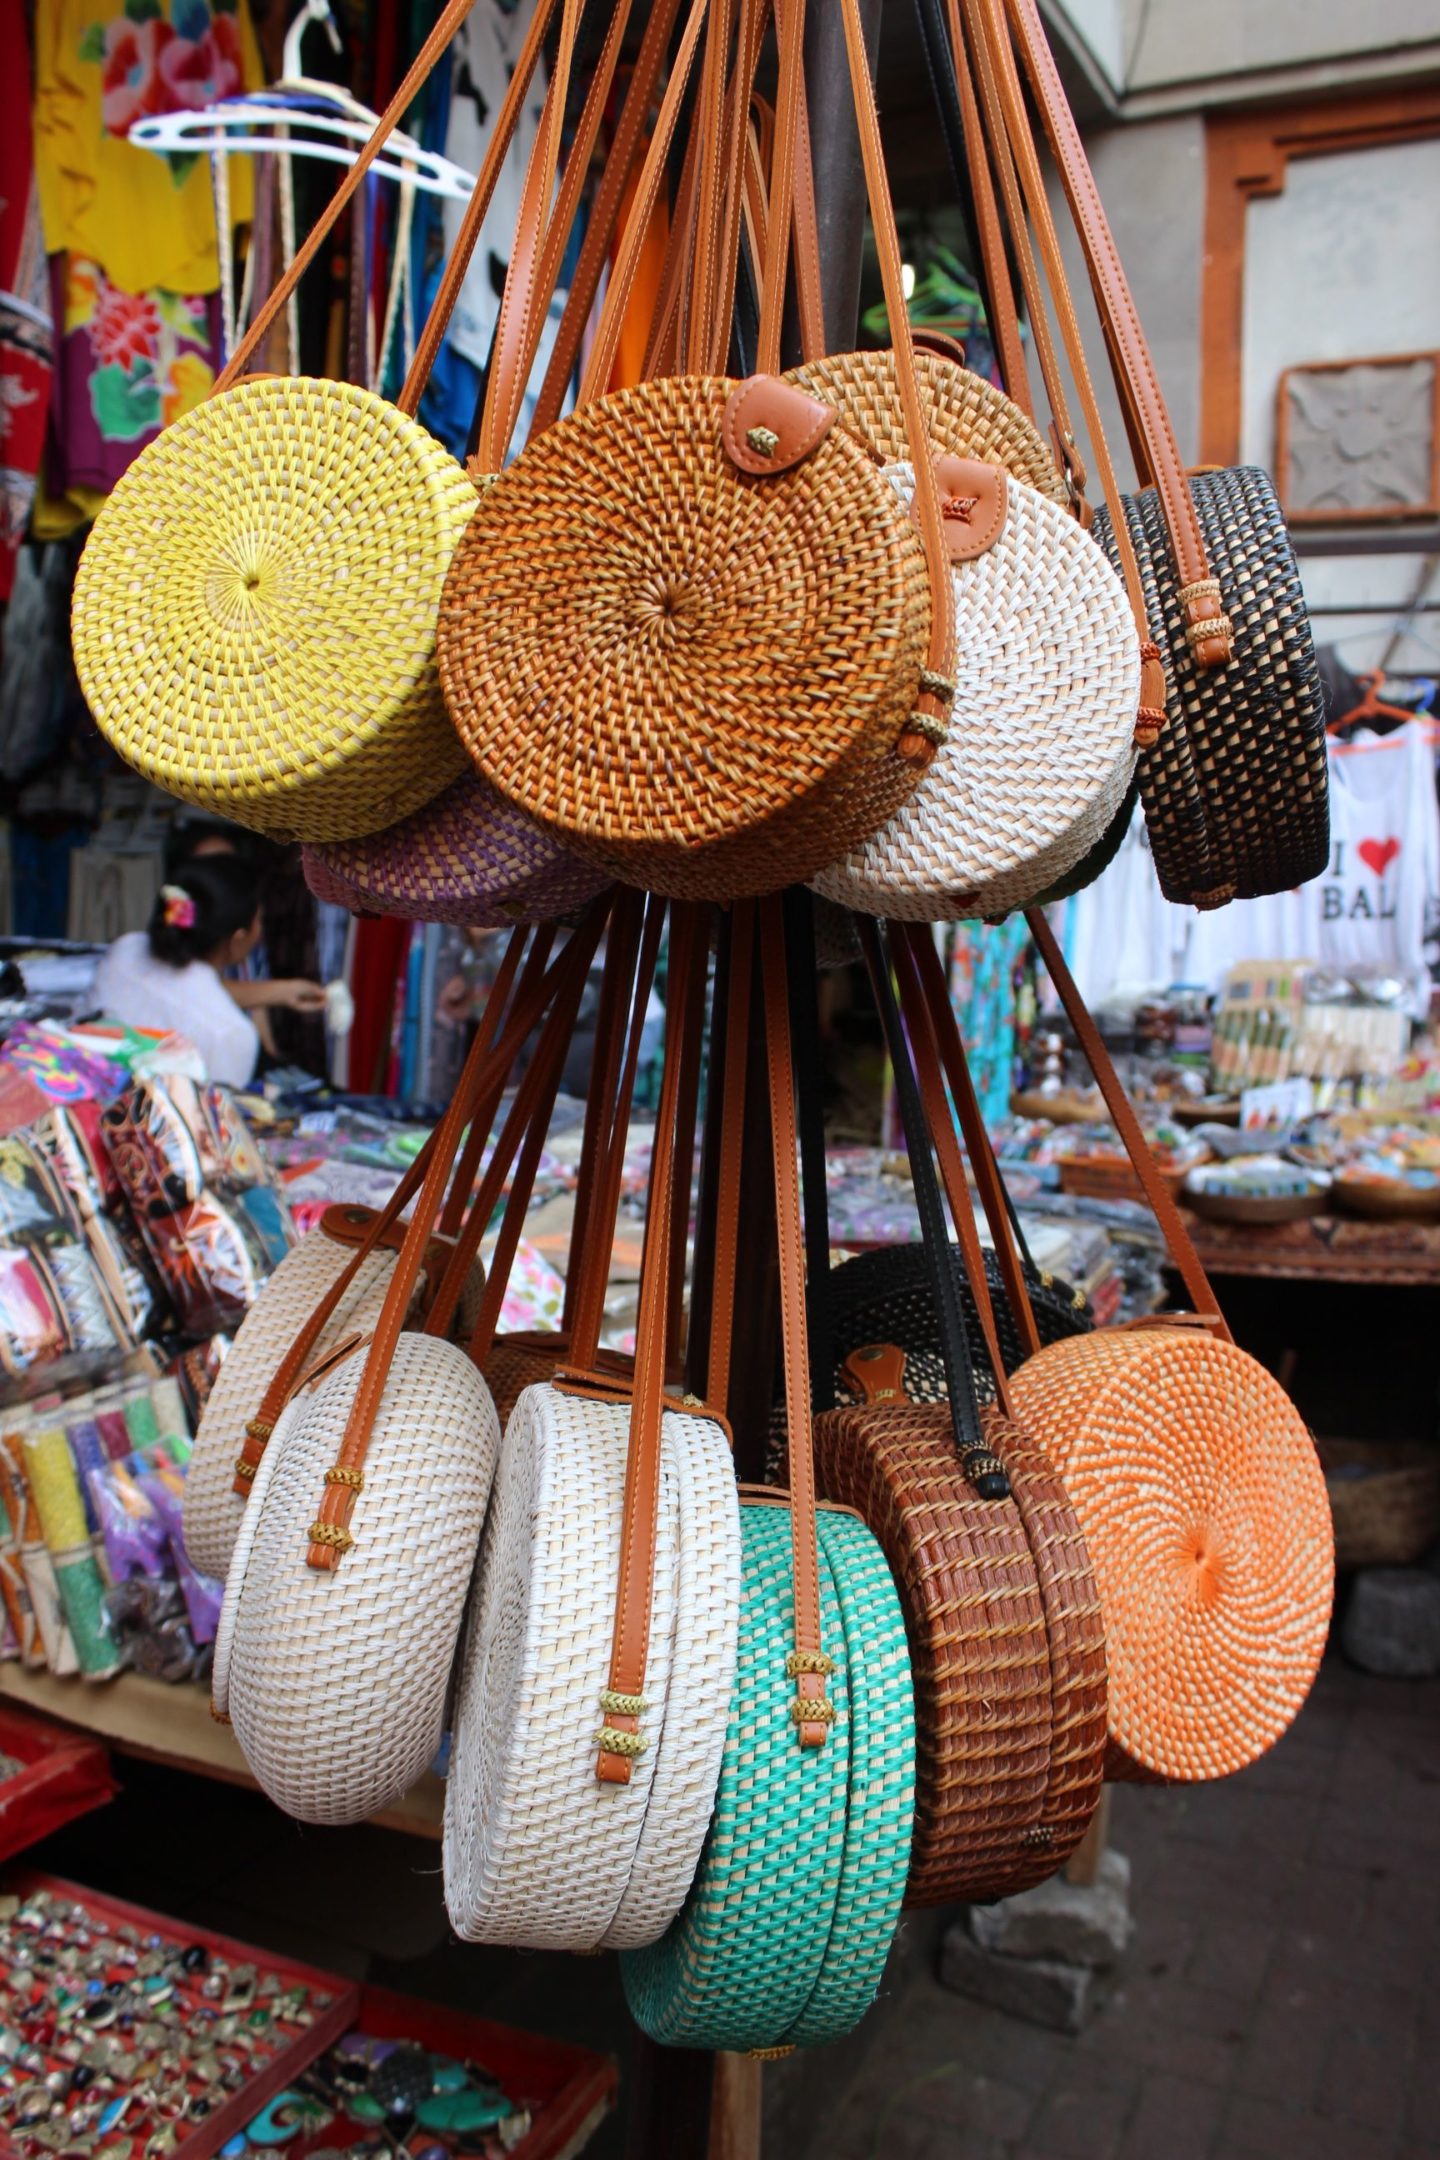 If you’ve ever heard of the Ubud Art Market, then you’ve probably also heard about the “Bali bag.” It’s a beautiful style of woven material that makes the perfect accessory for any traveller. Bali bags come in different shapes, but most typically, you’ll see people sporting the round ones with colourful fabric linings. You can find them at any tourist stand; the Balinese know that, for some reason, most travellers “need” this bag.